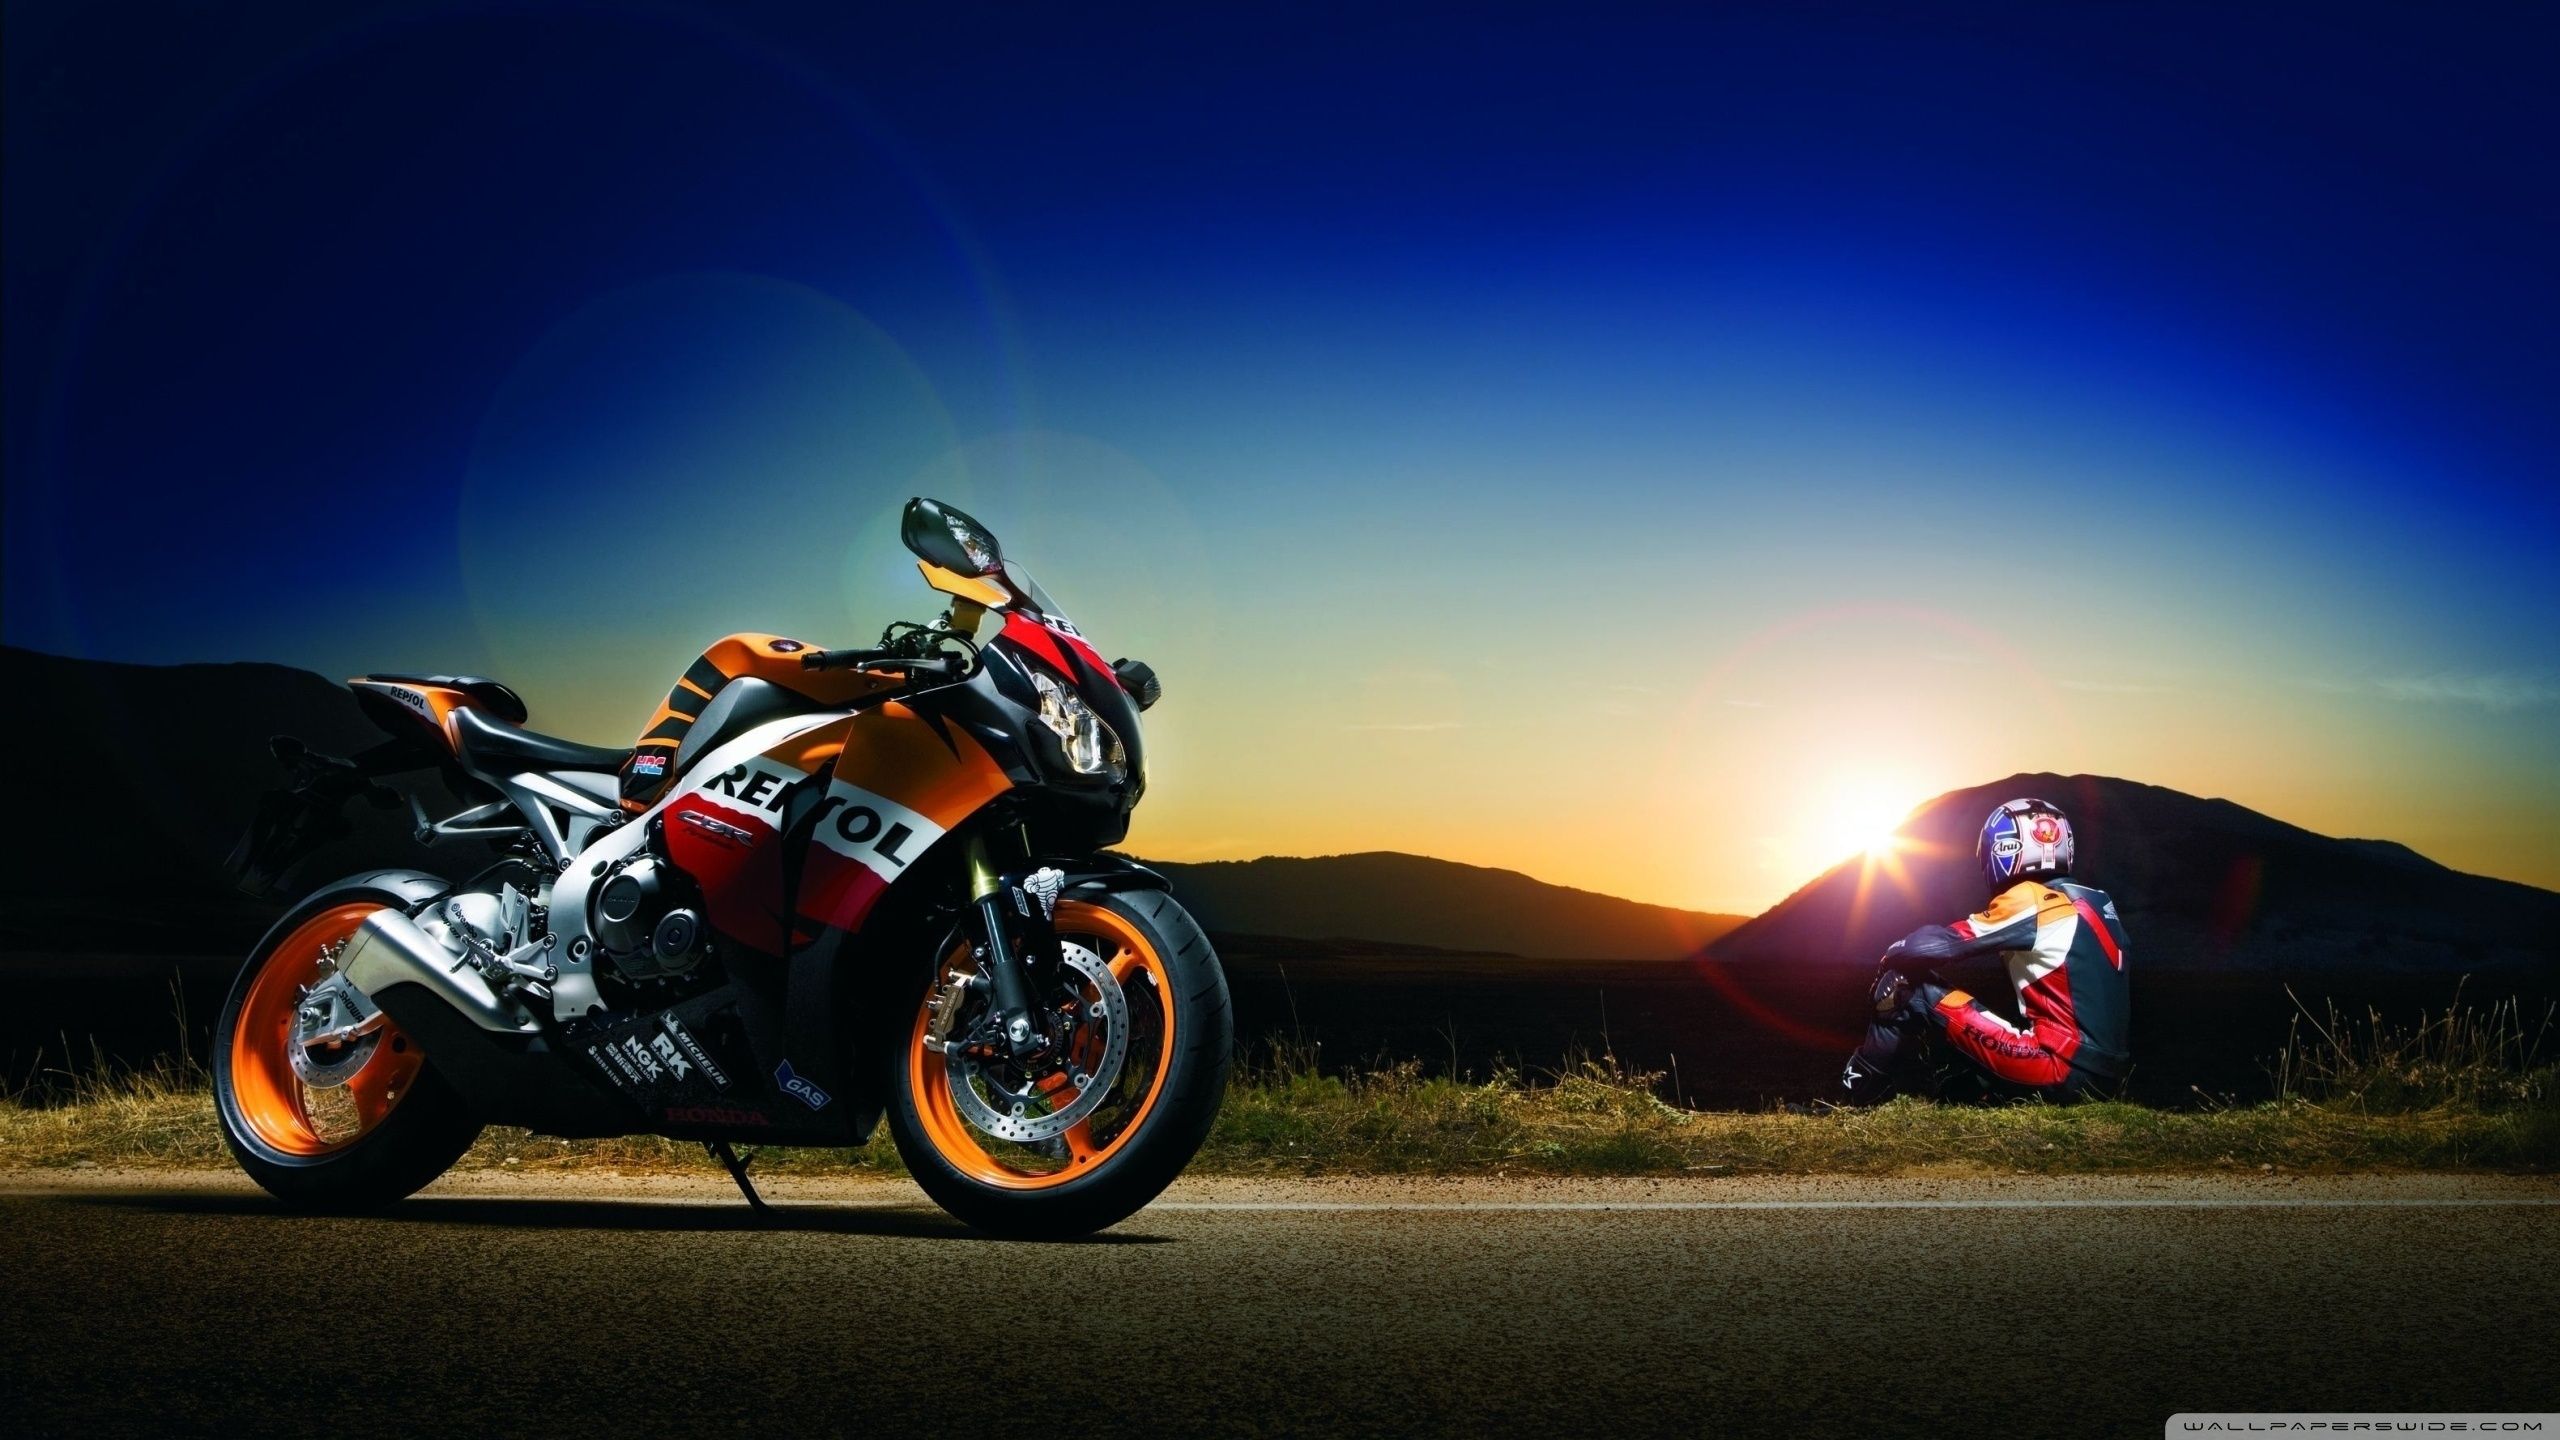 A view of a Repsol Honda replica motorcycle in front of a sunset